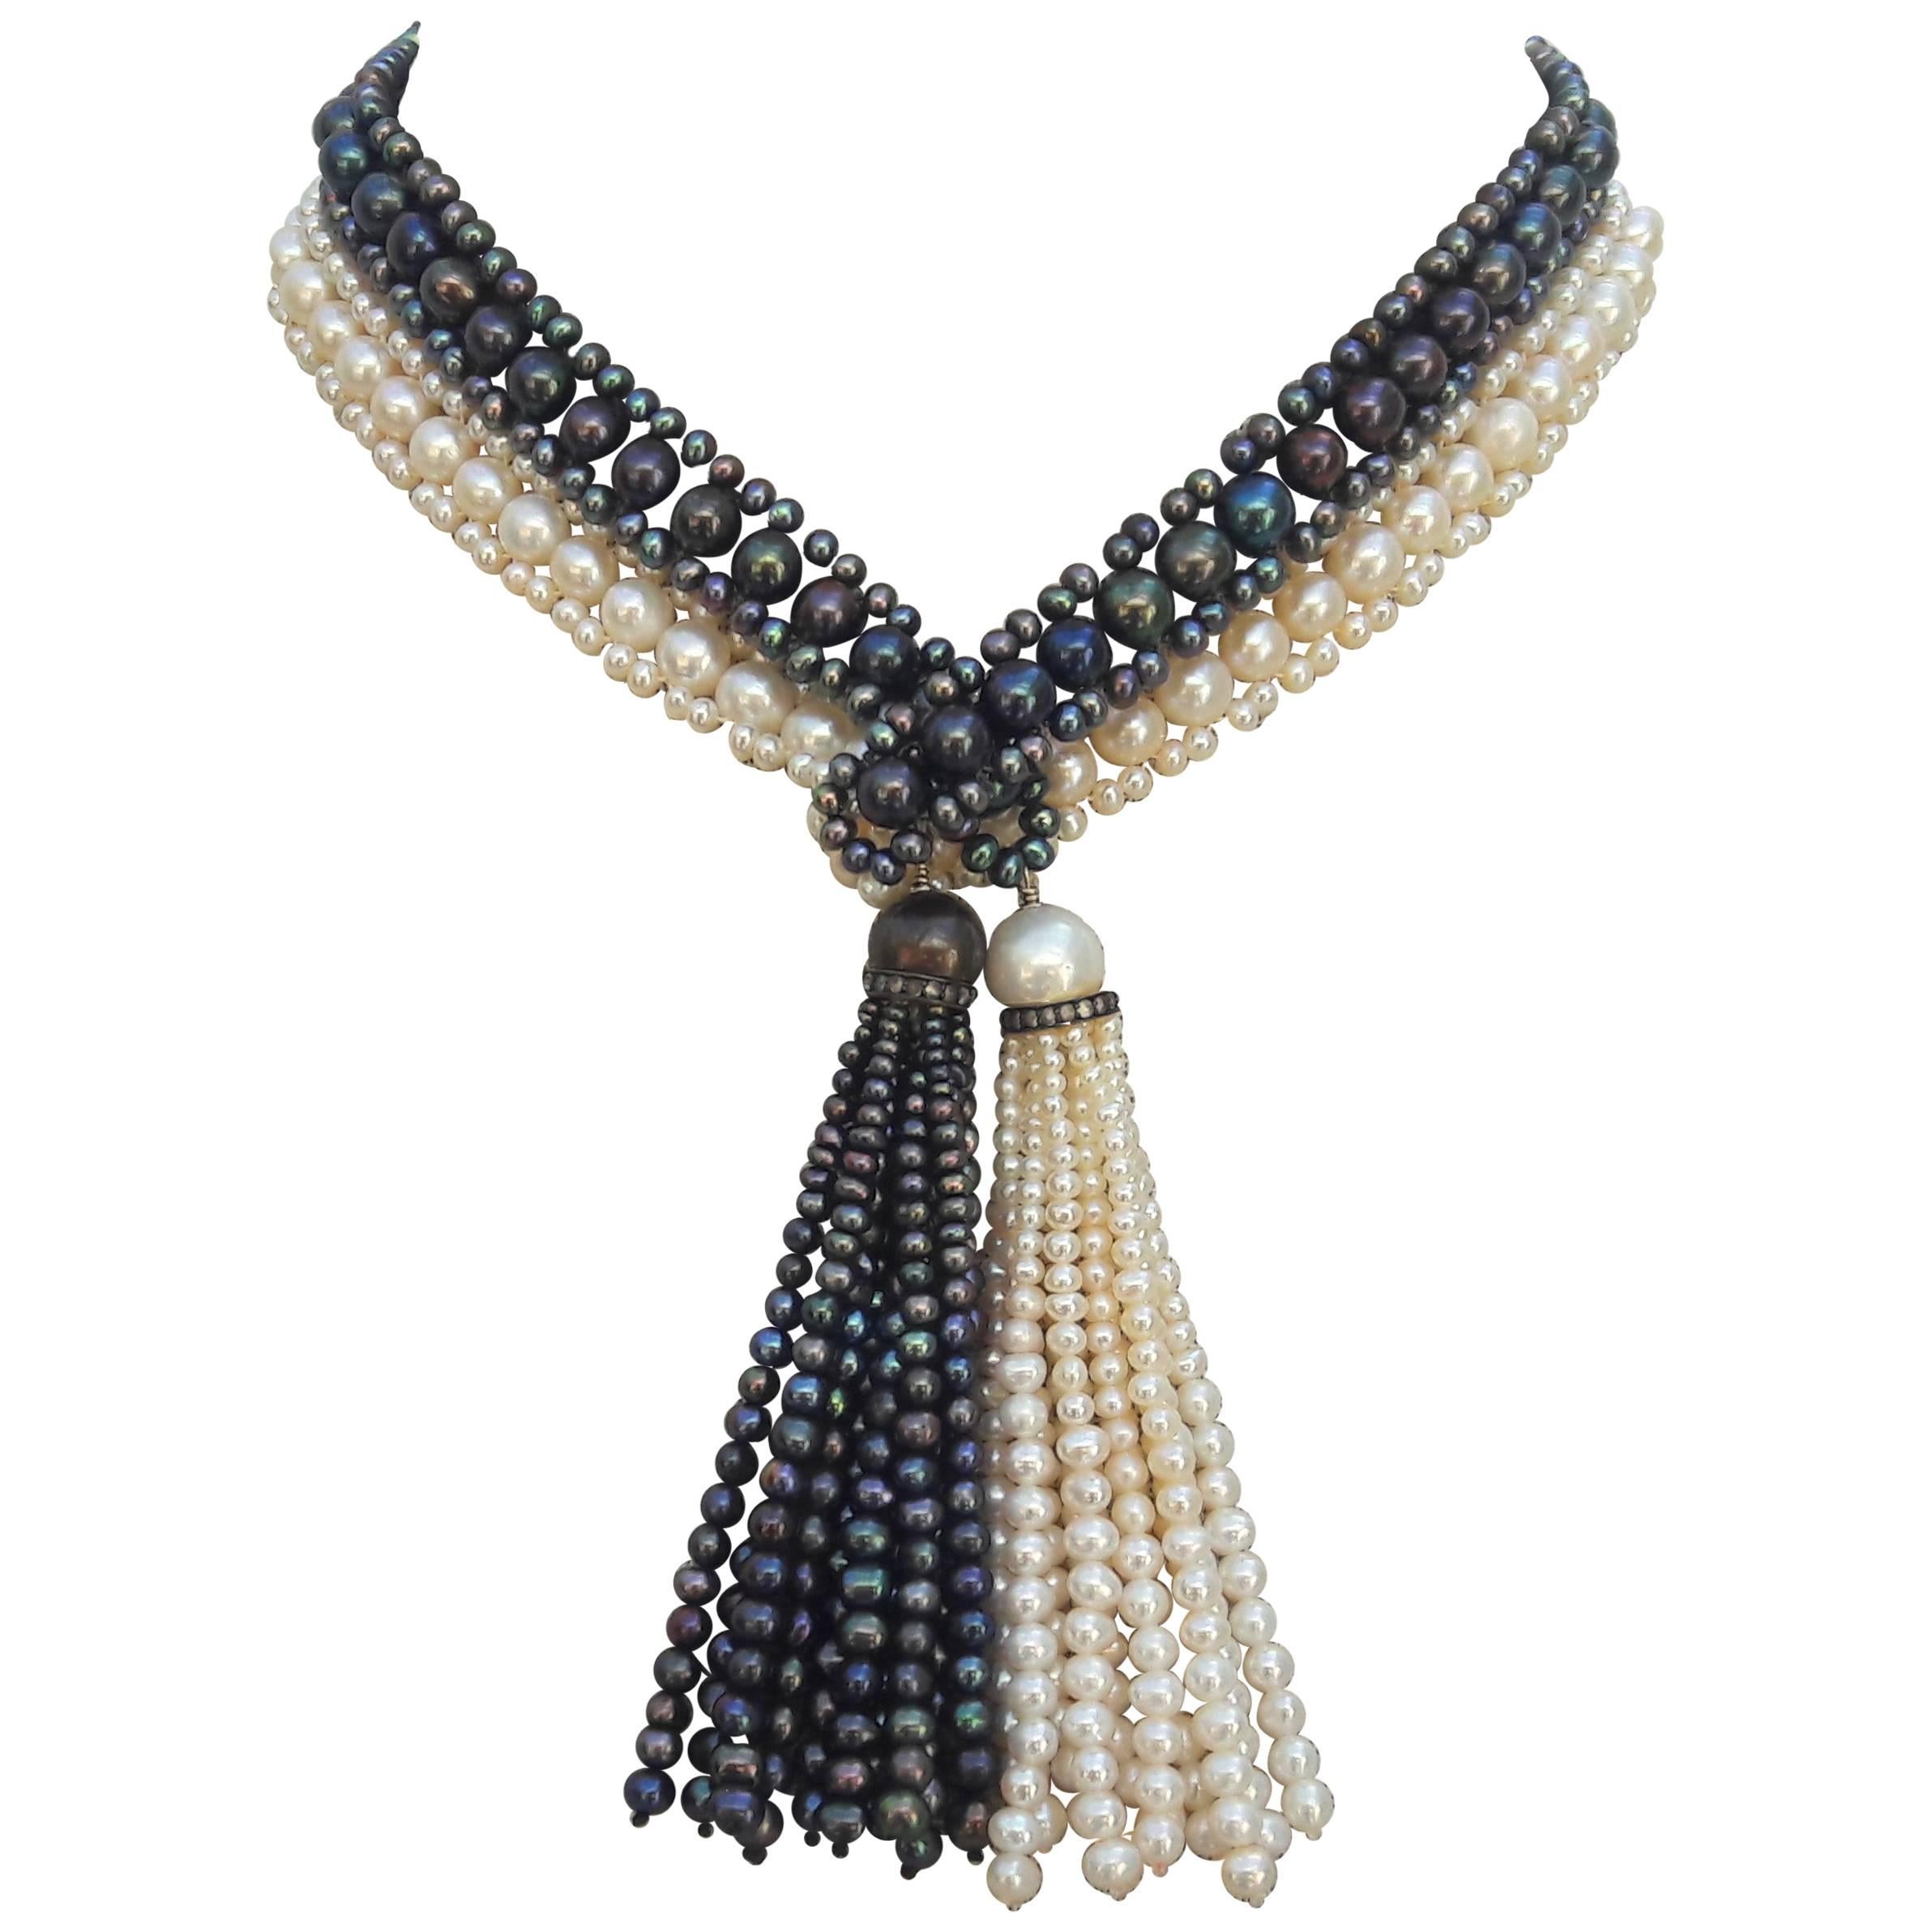 Marina J. Long Woven Black and White Pearl Sautoir Necklace in Art Deco Style 